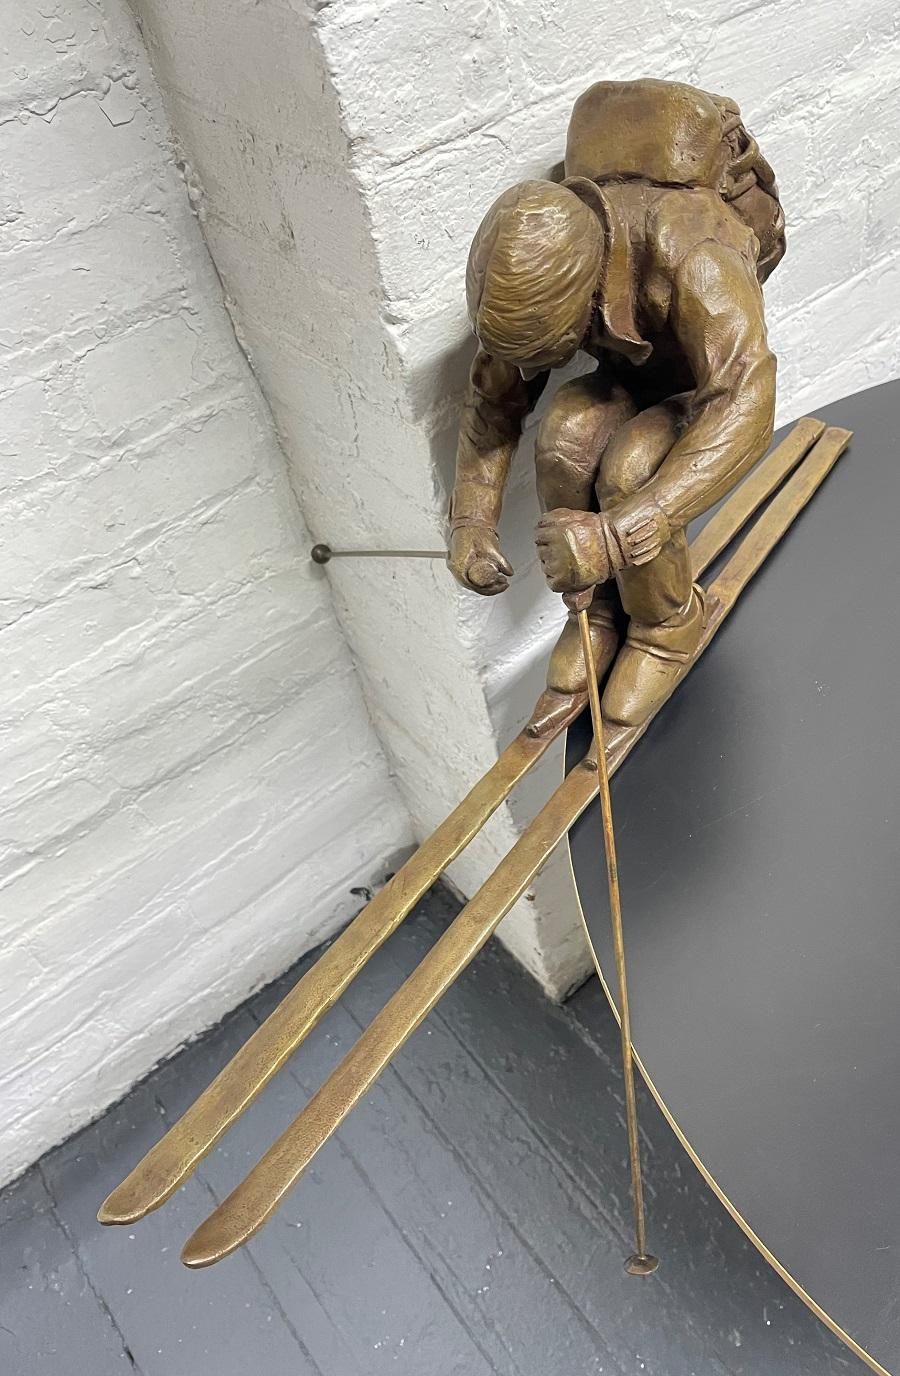 Large decorative bronze sculpture of a skier signed and dated on one of the skis.  This sculpture is not free-standing and will need a base.